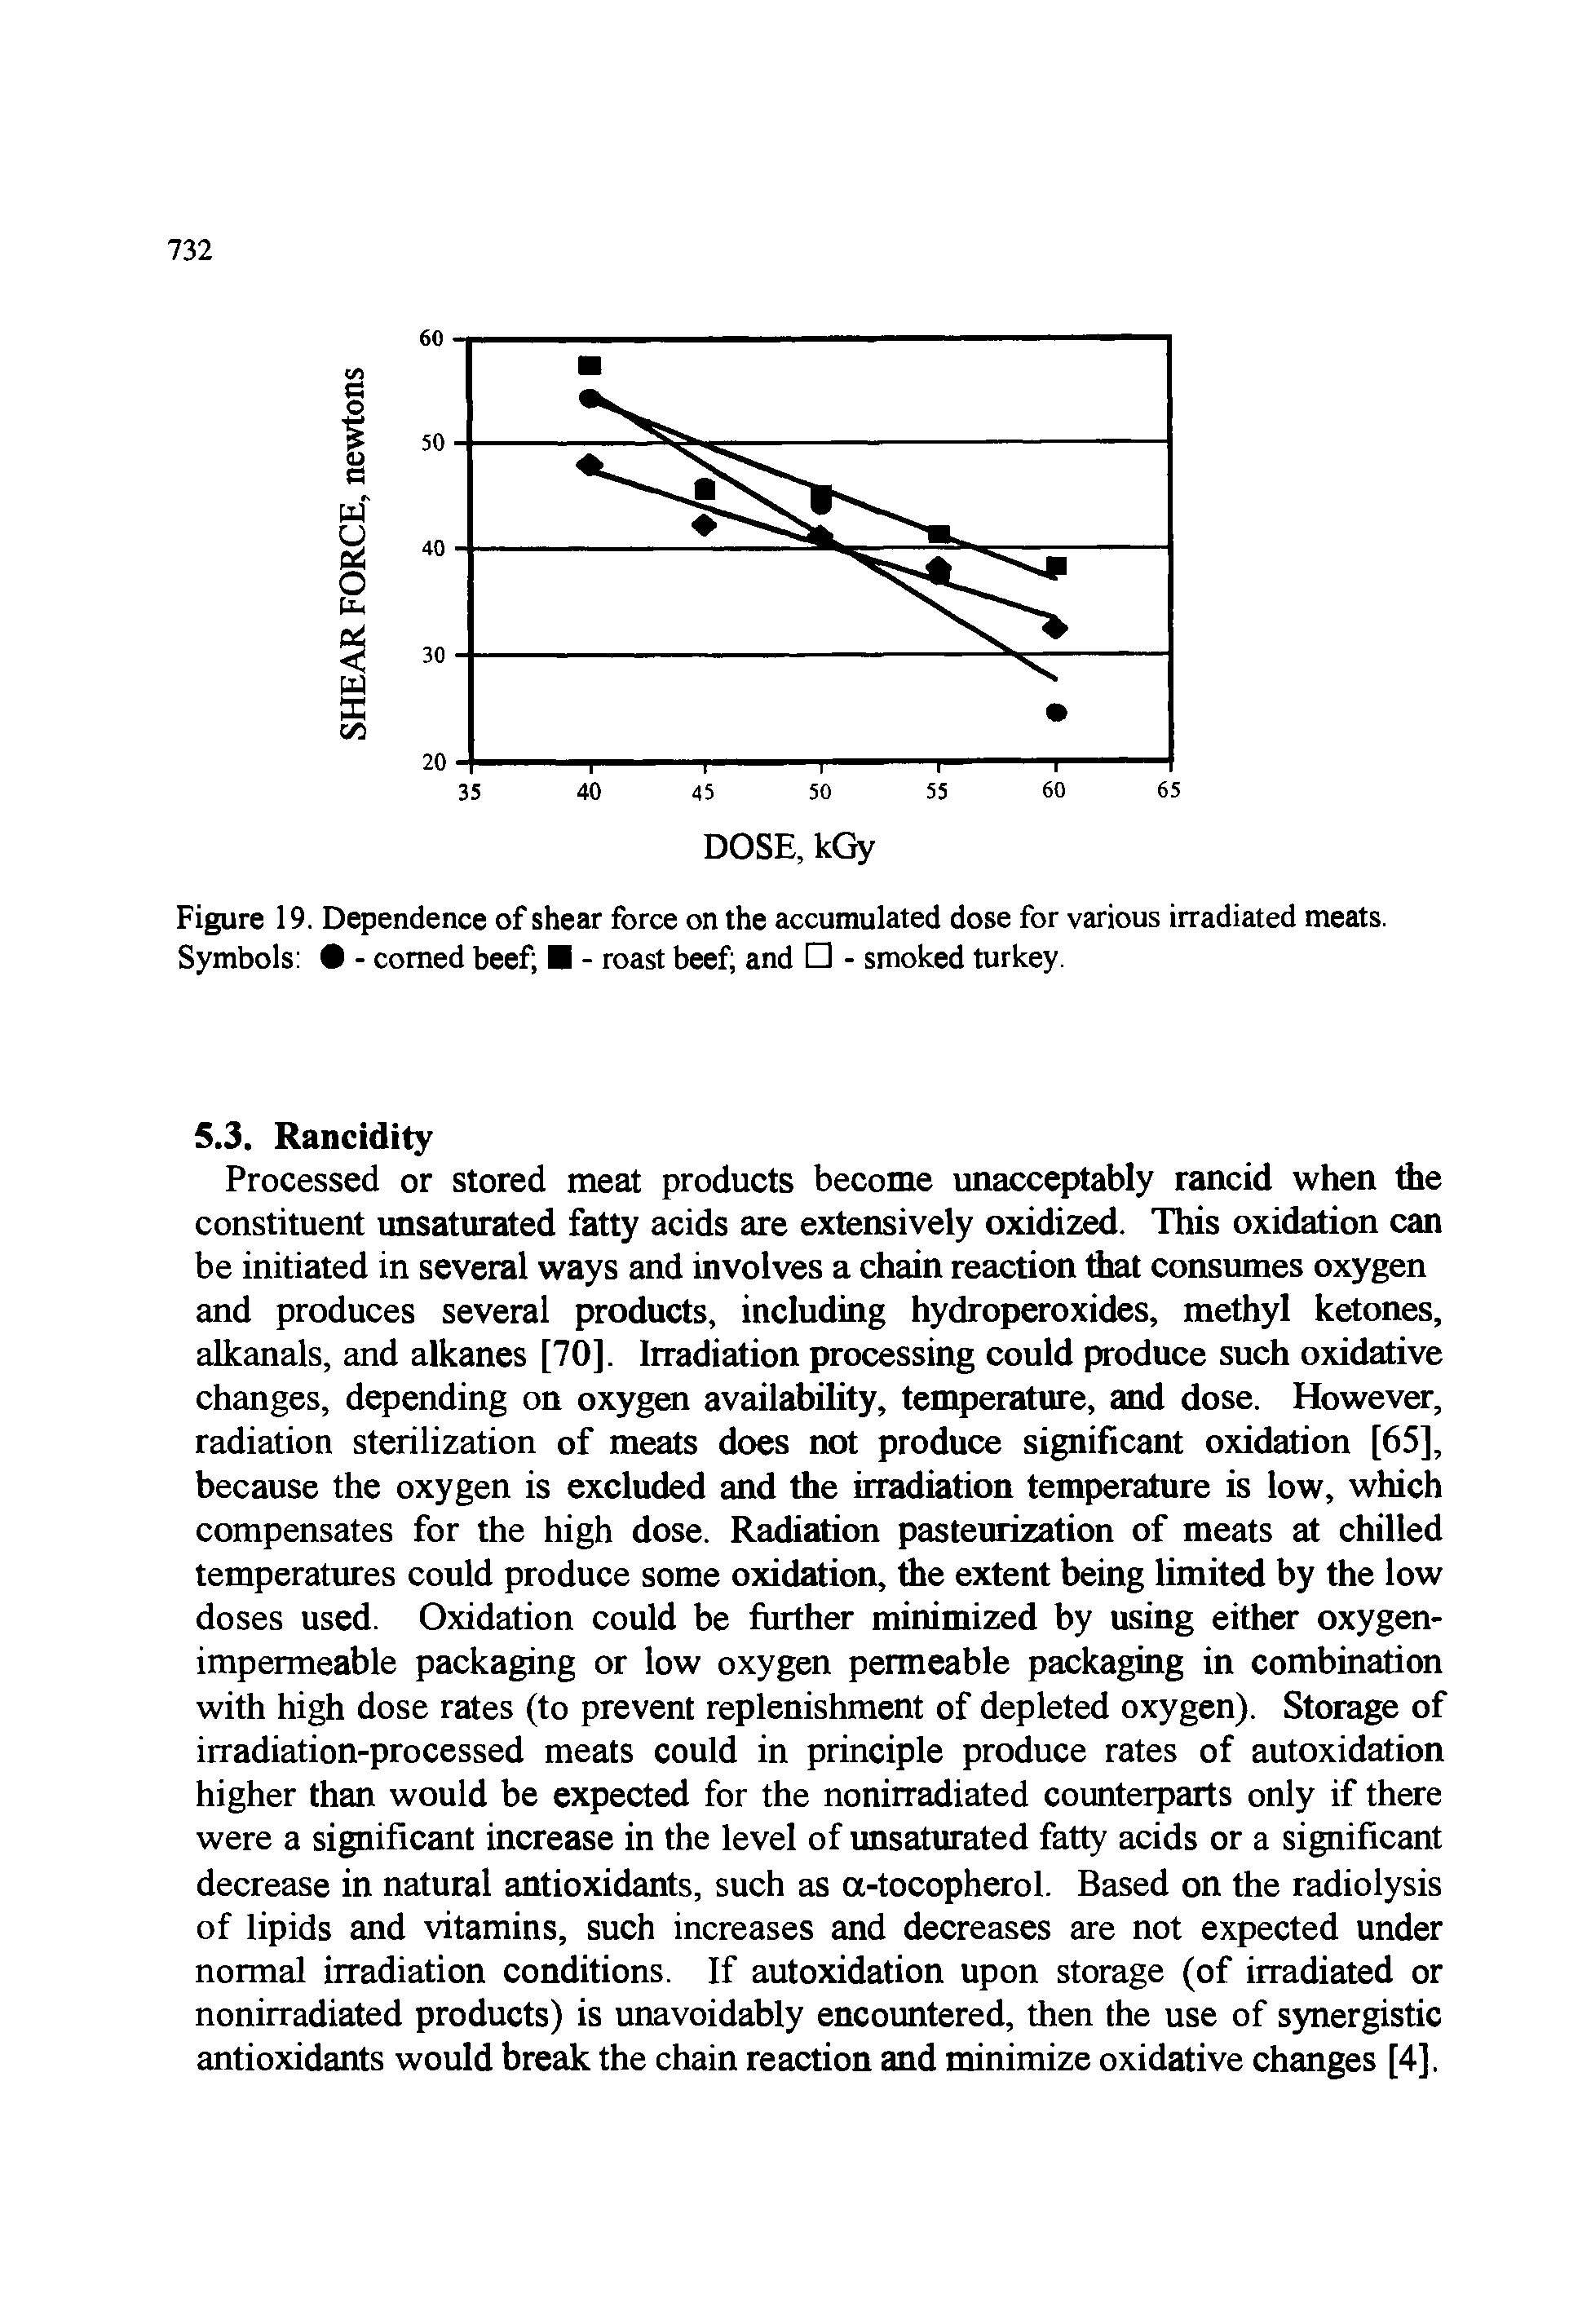 Figure 19. Dependence of shear force on the accumulated dose for various irradiated meats. Symbols - corned beef - roast beef and - smoked turkey.